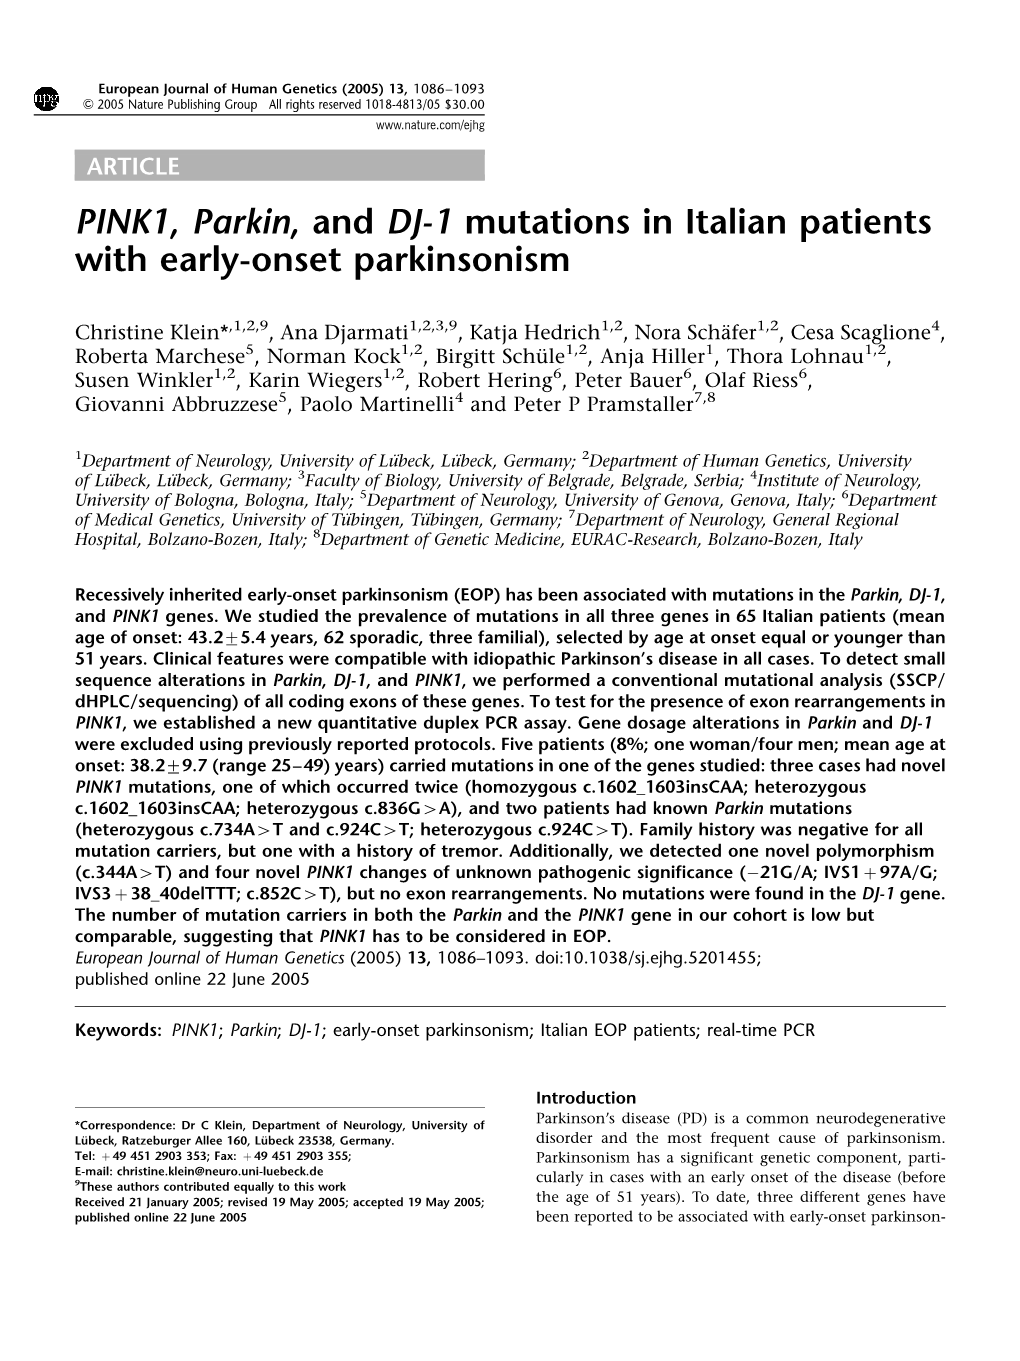 PINK1, Parkin, and DJ-1 Mutations in Italian Patients with Early-Onset Parkinsonism